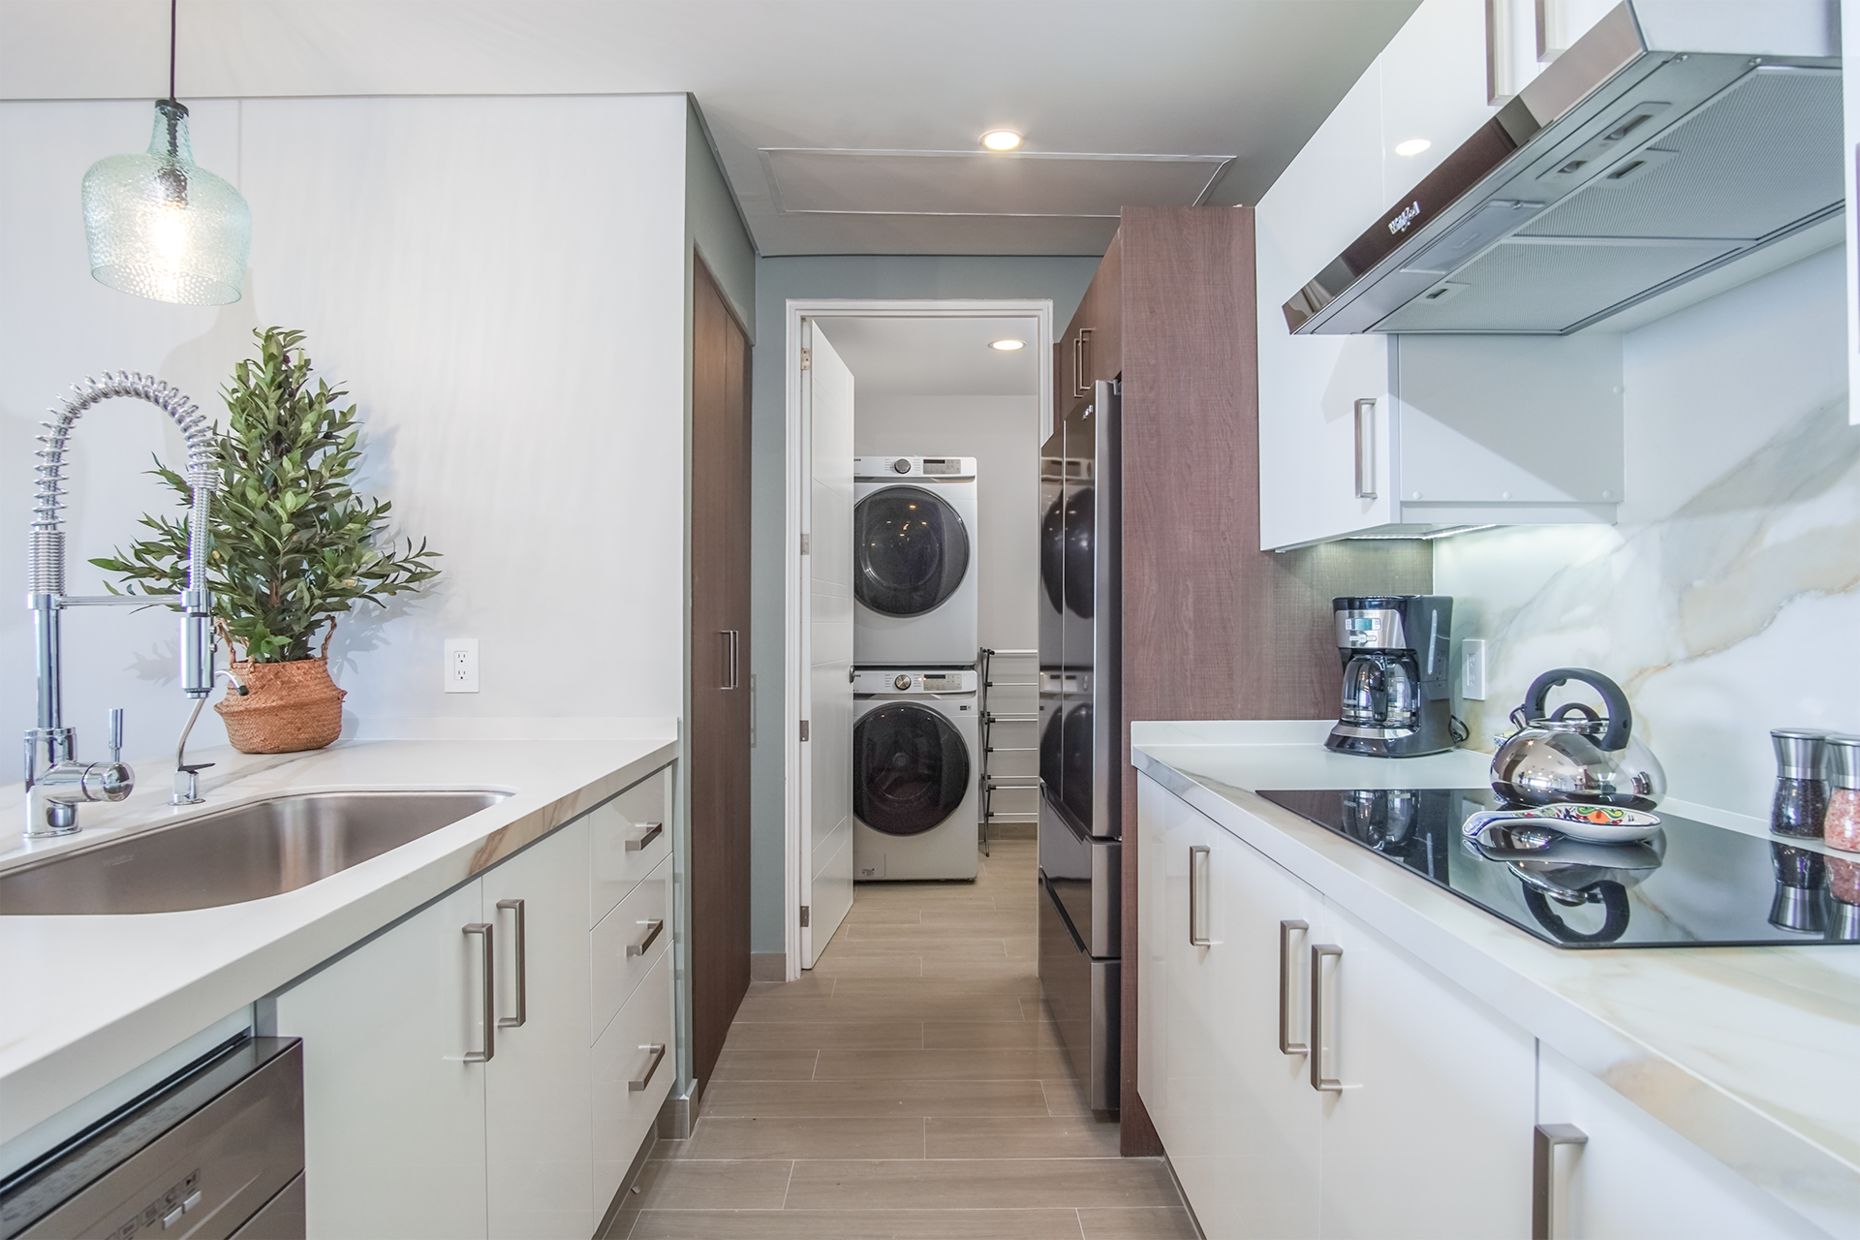 the entire kitchen is well laid out and complete, with washer and dryer in an attached utility room